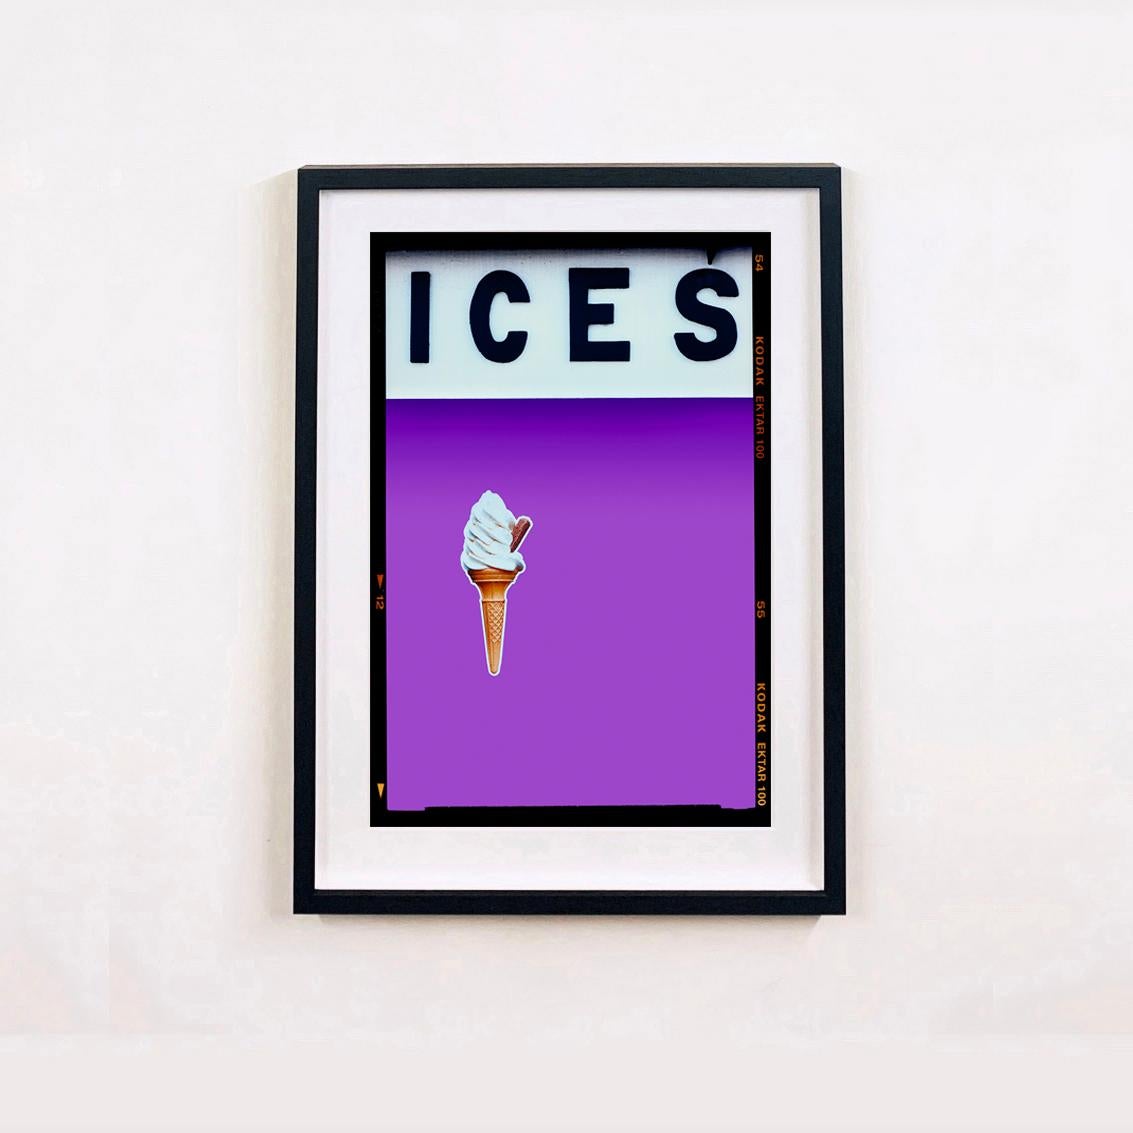 Ices (Lilac), Bexhill-on-Sea - British seaside color photography - Photograph by Richard Heeps